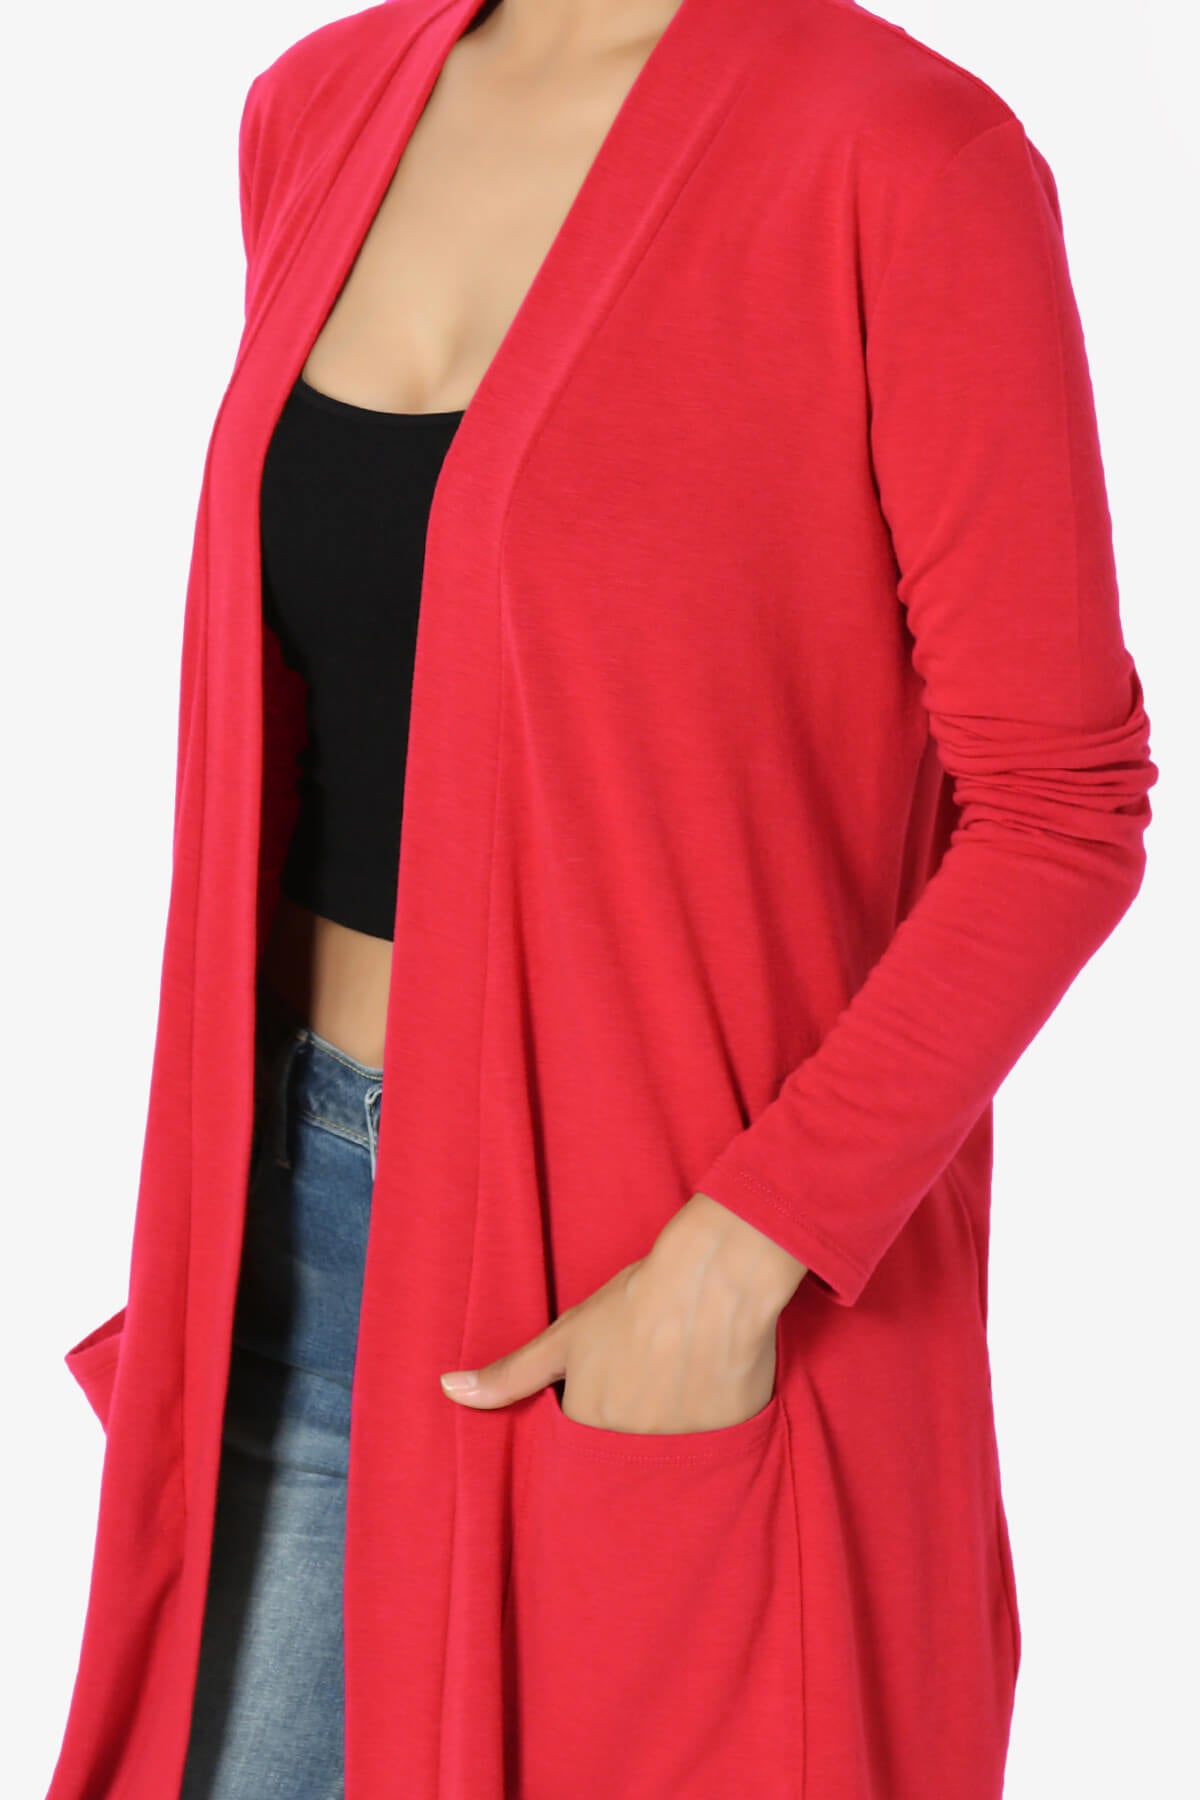 Daday Long Sleeve Pocket Open Front Cardigan RED_5